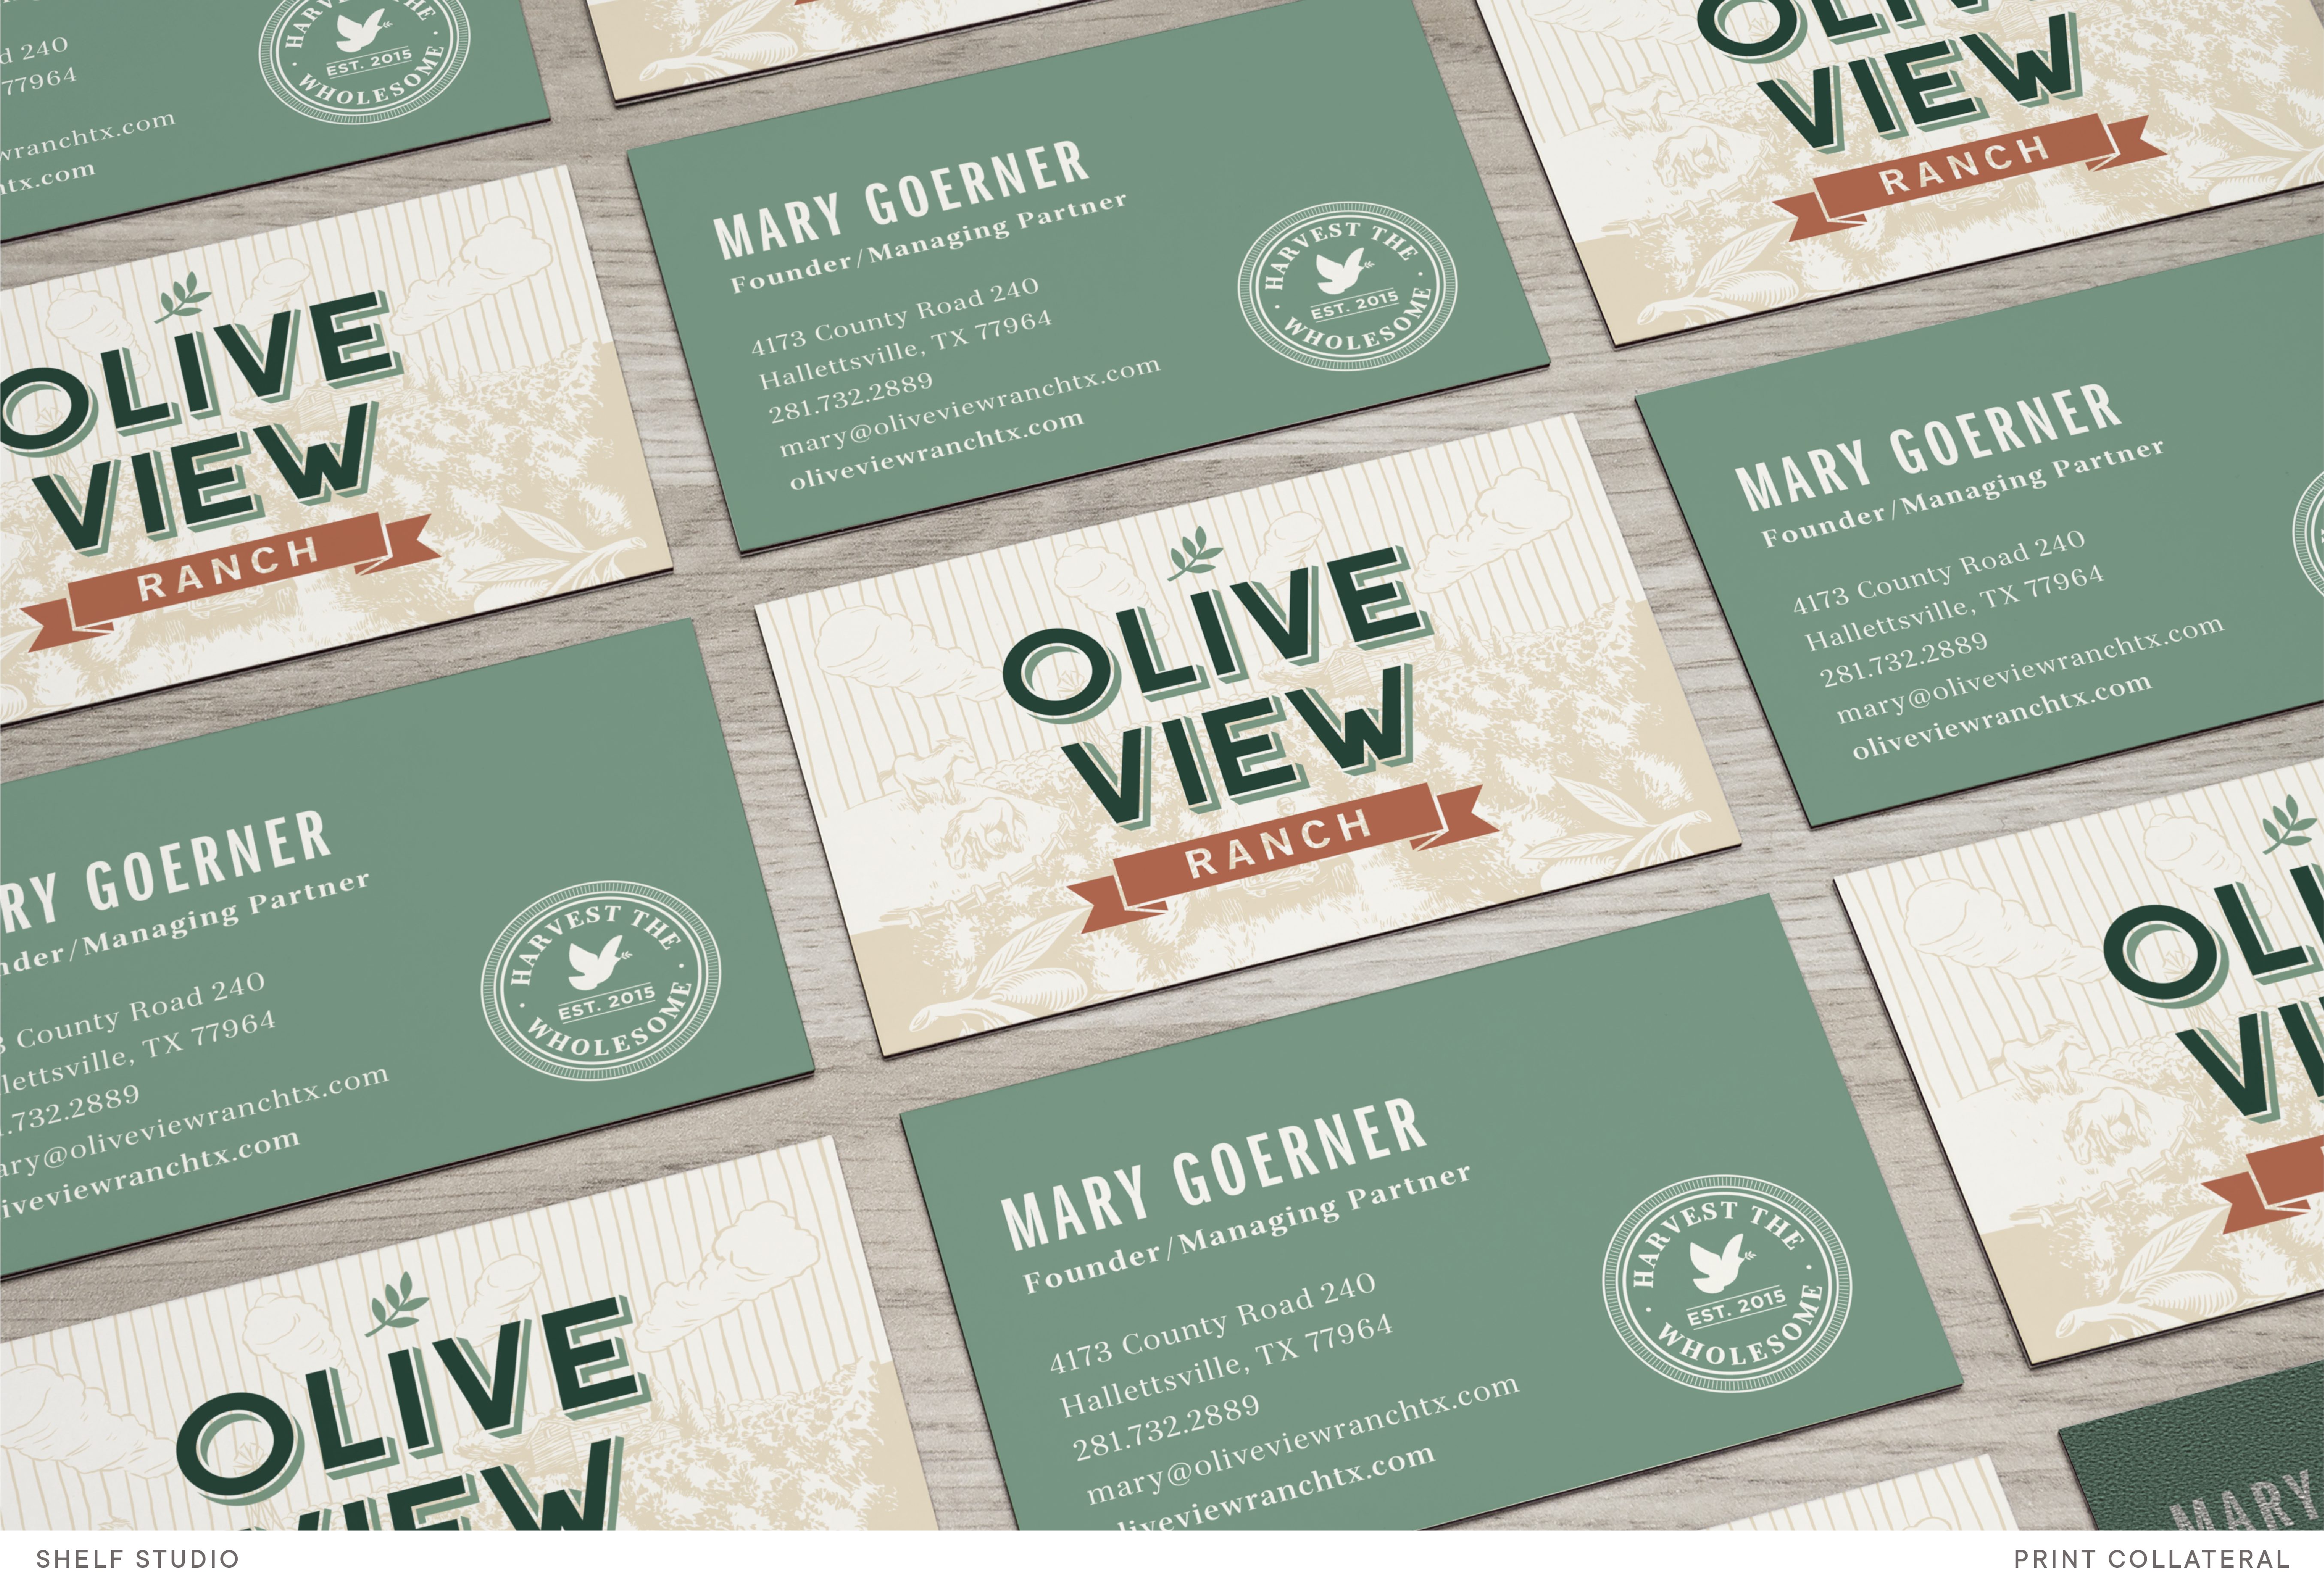 OliveViewRanch_SHELFWEB_NewImages_PrintCollateral_1